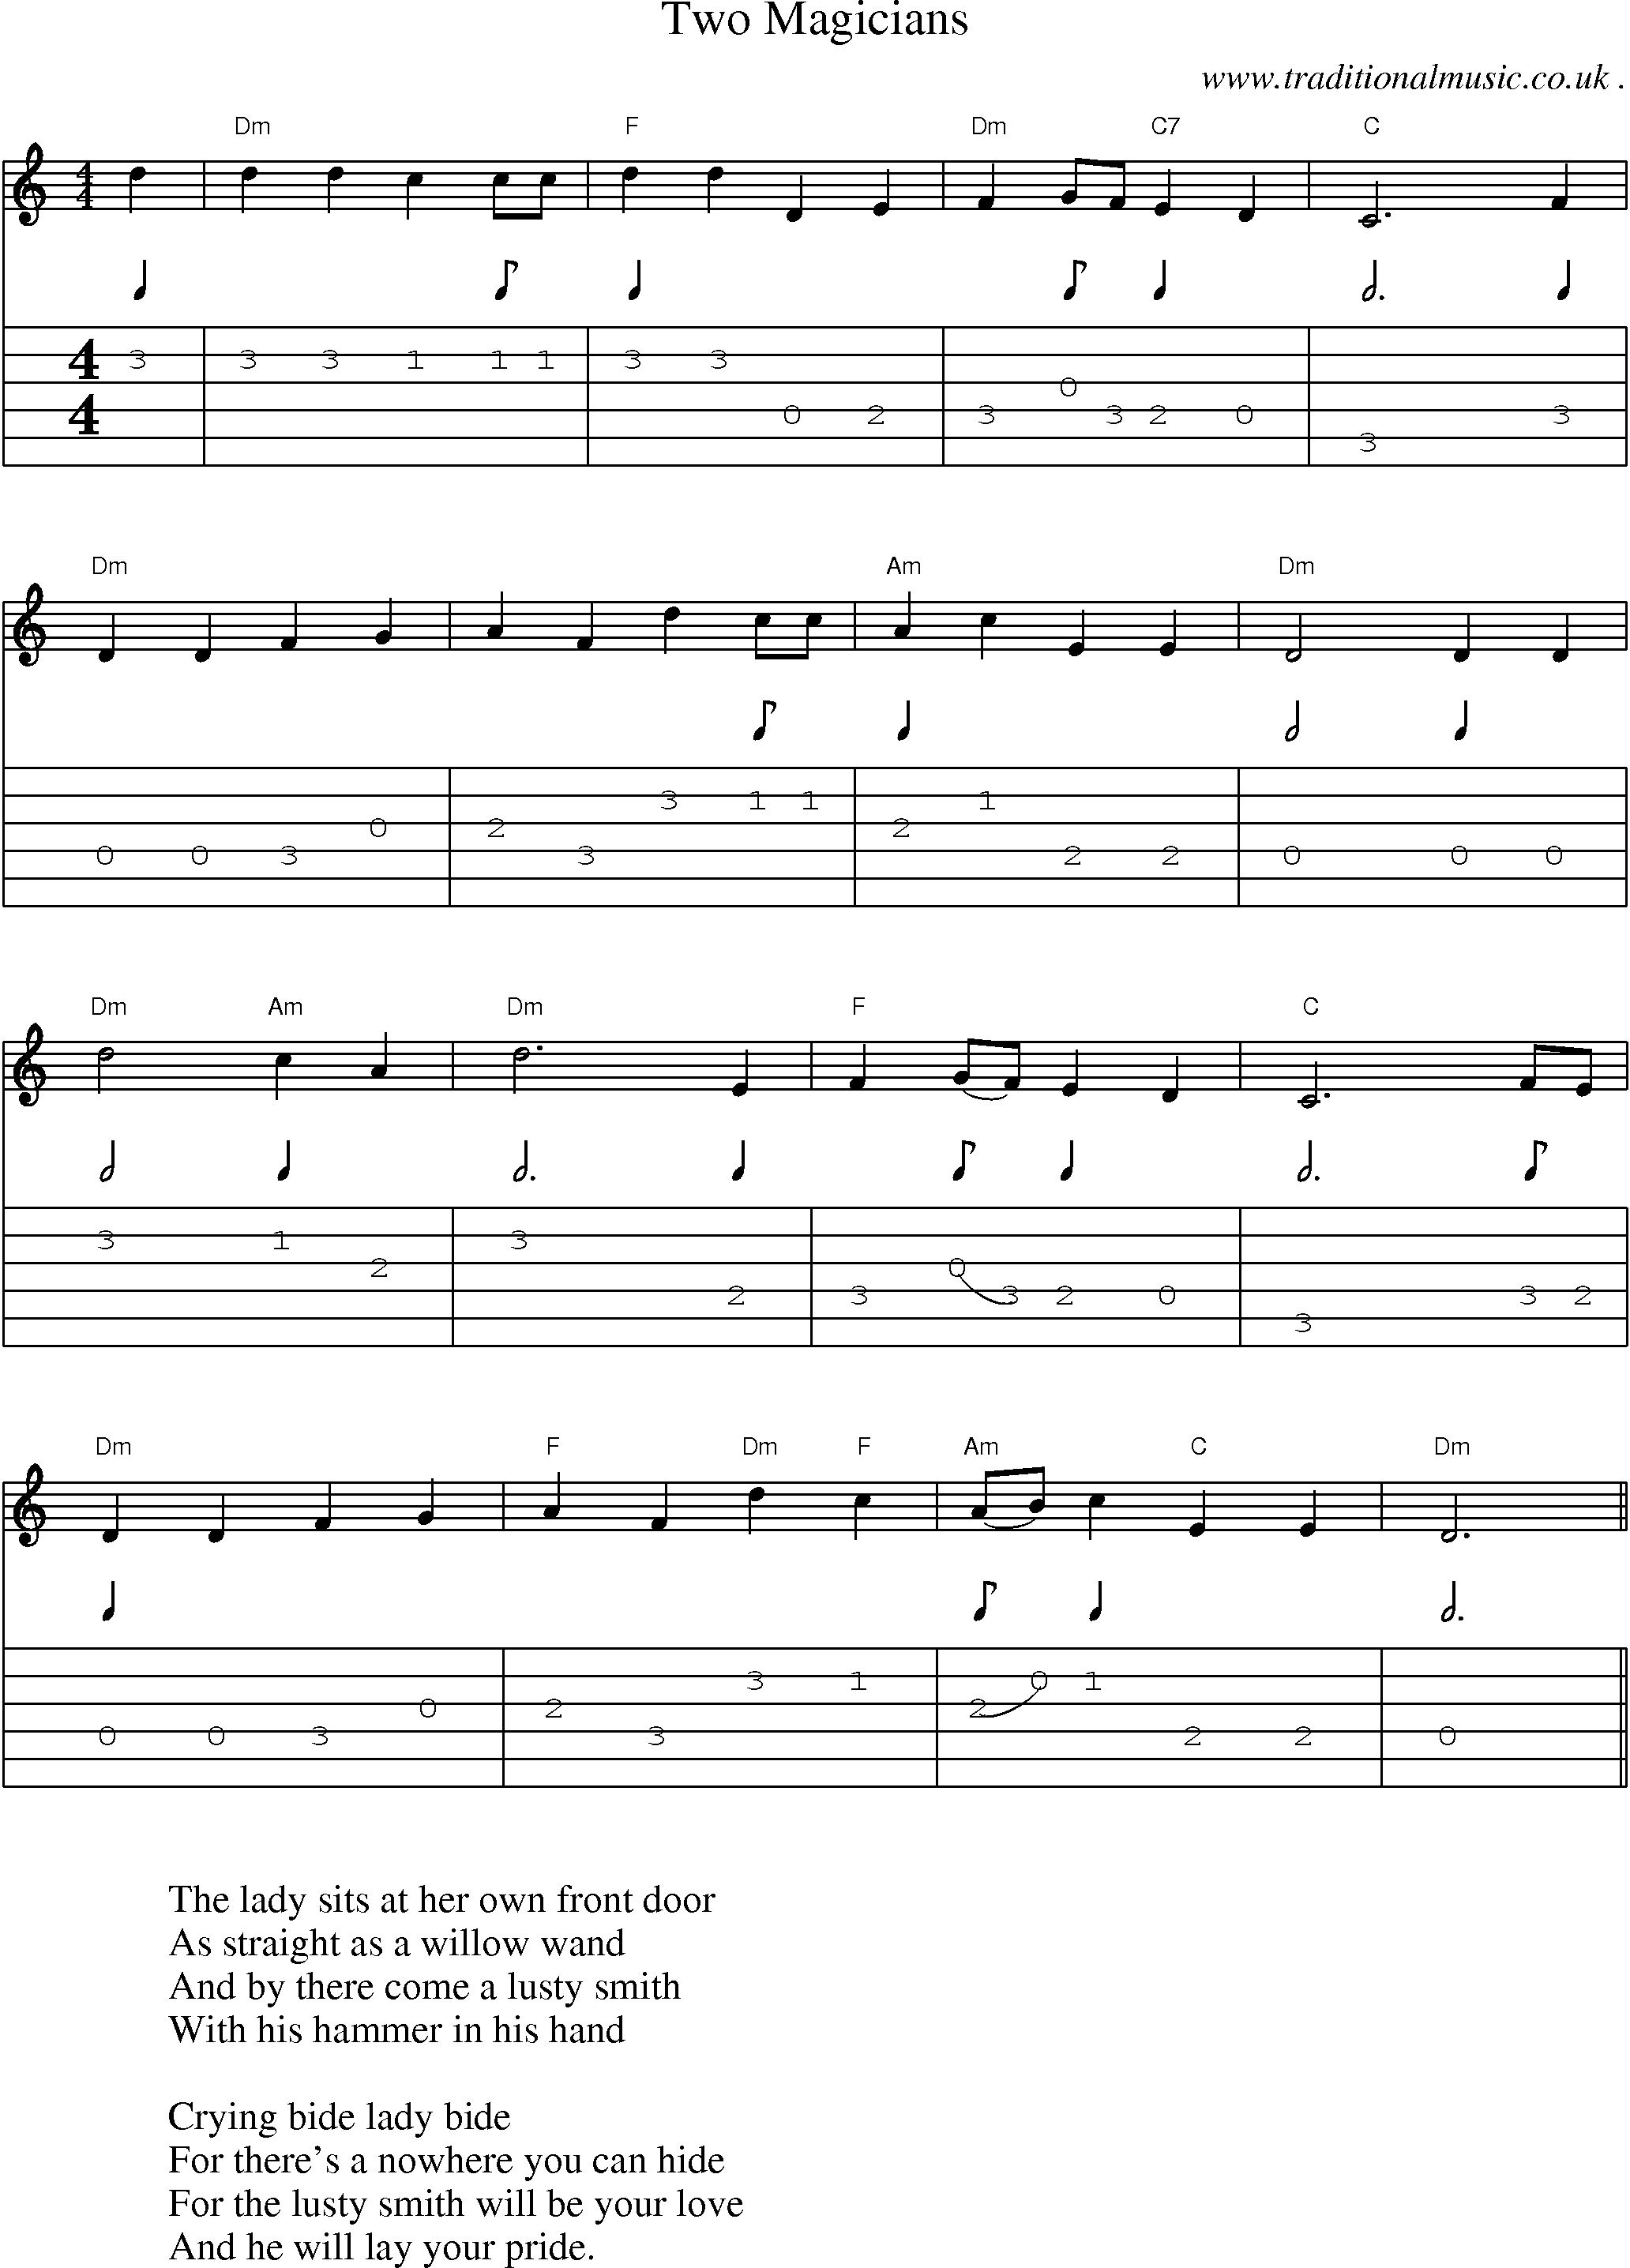 Sheet-Music and Guitar Tabs for Two Magicians